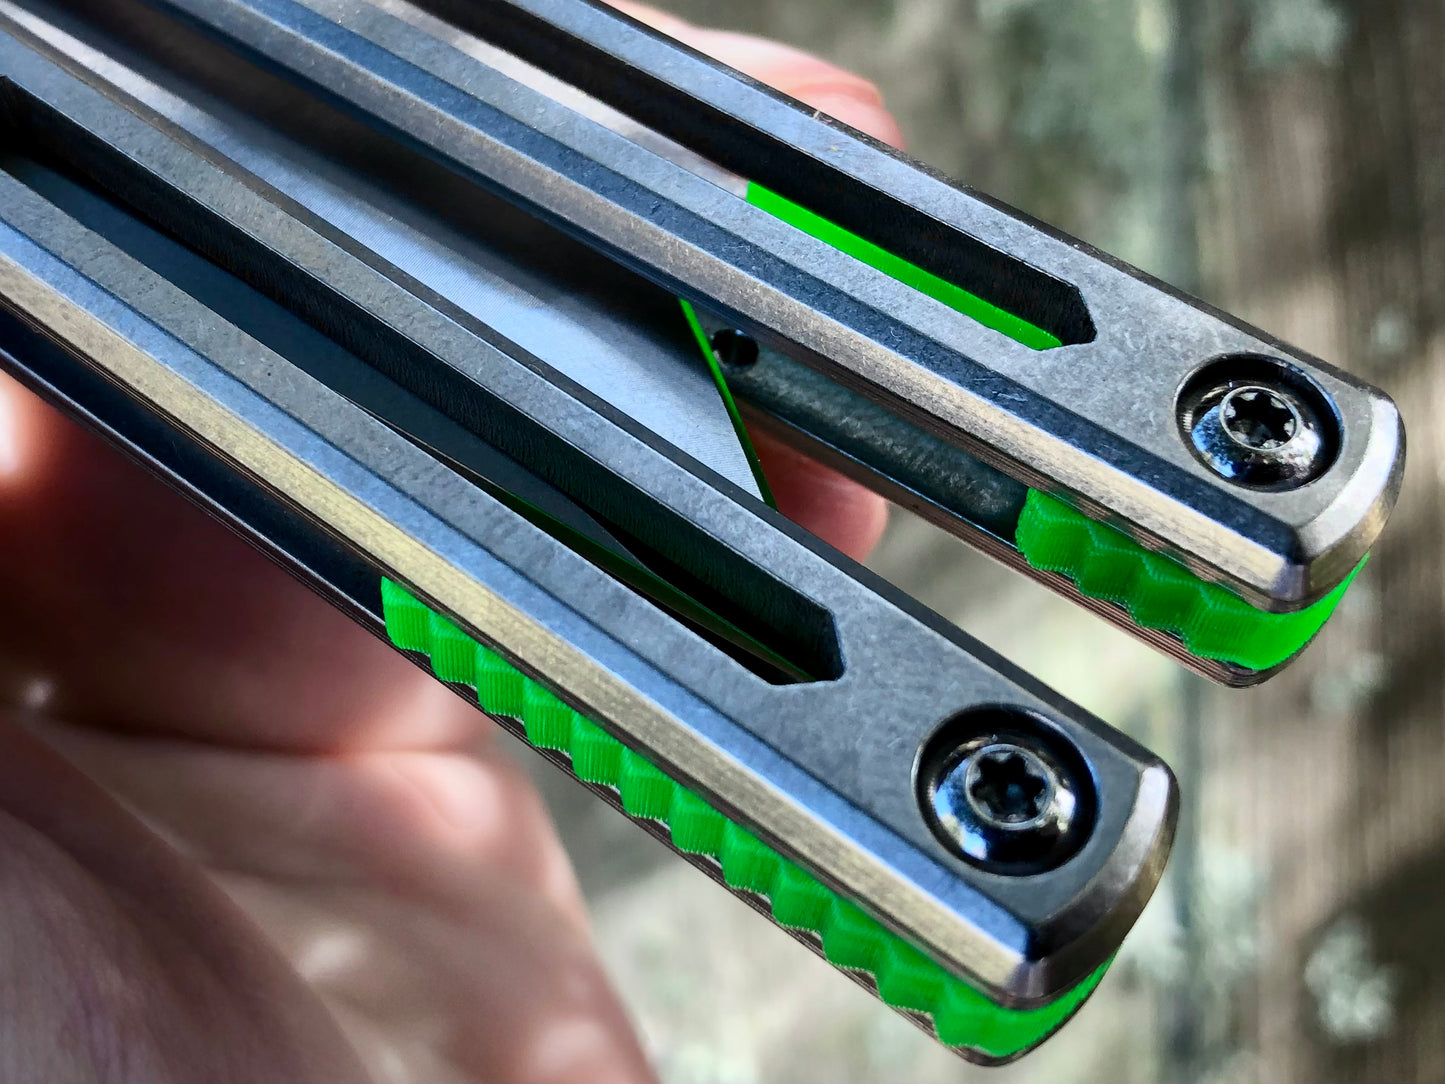 These Zippy spacers designed for the Squid Industries Hydro Balisong are made in-house from a rubbery, shatter-proof polyurethane. They add positive "sawtooth" jimping to the Hydro and are available as either full-length flush spacers for a more neutral balance, or handle extensions (with an adjustable tungsten weight system) to protect the handles from drops and increase momentum. A cosmetic blade insert is included.